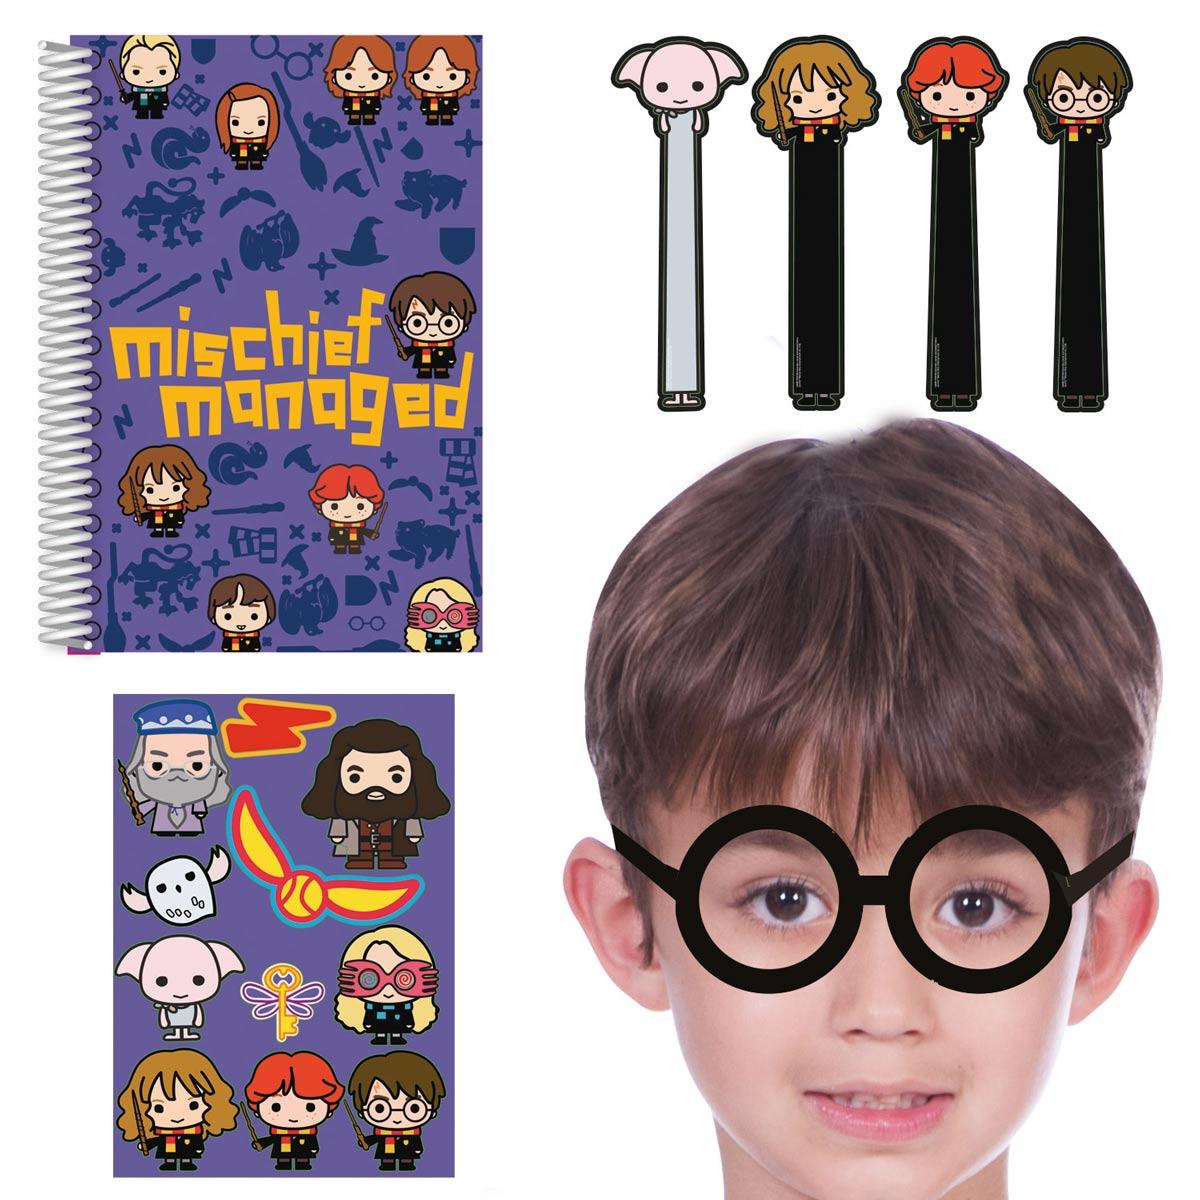 16 pce Harry Potter Favour Pack by Amscan 9905201 available here at Karnival Costumes online party shop